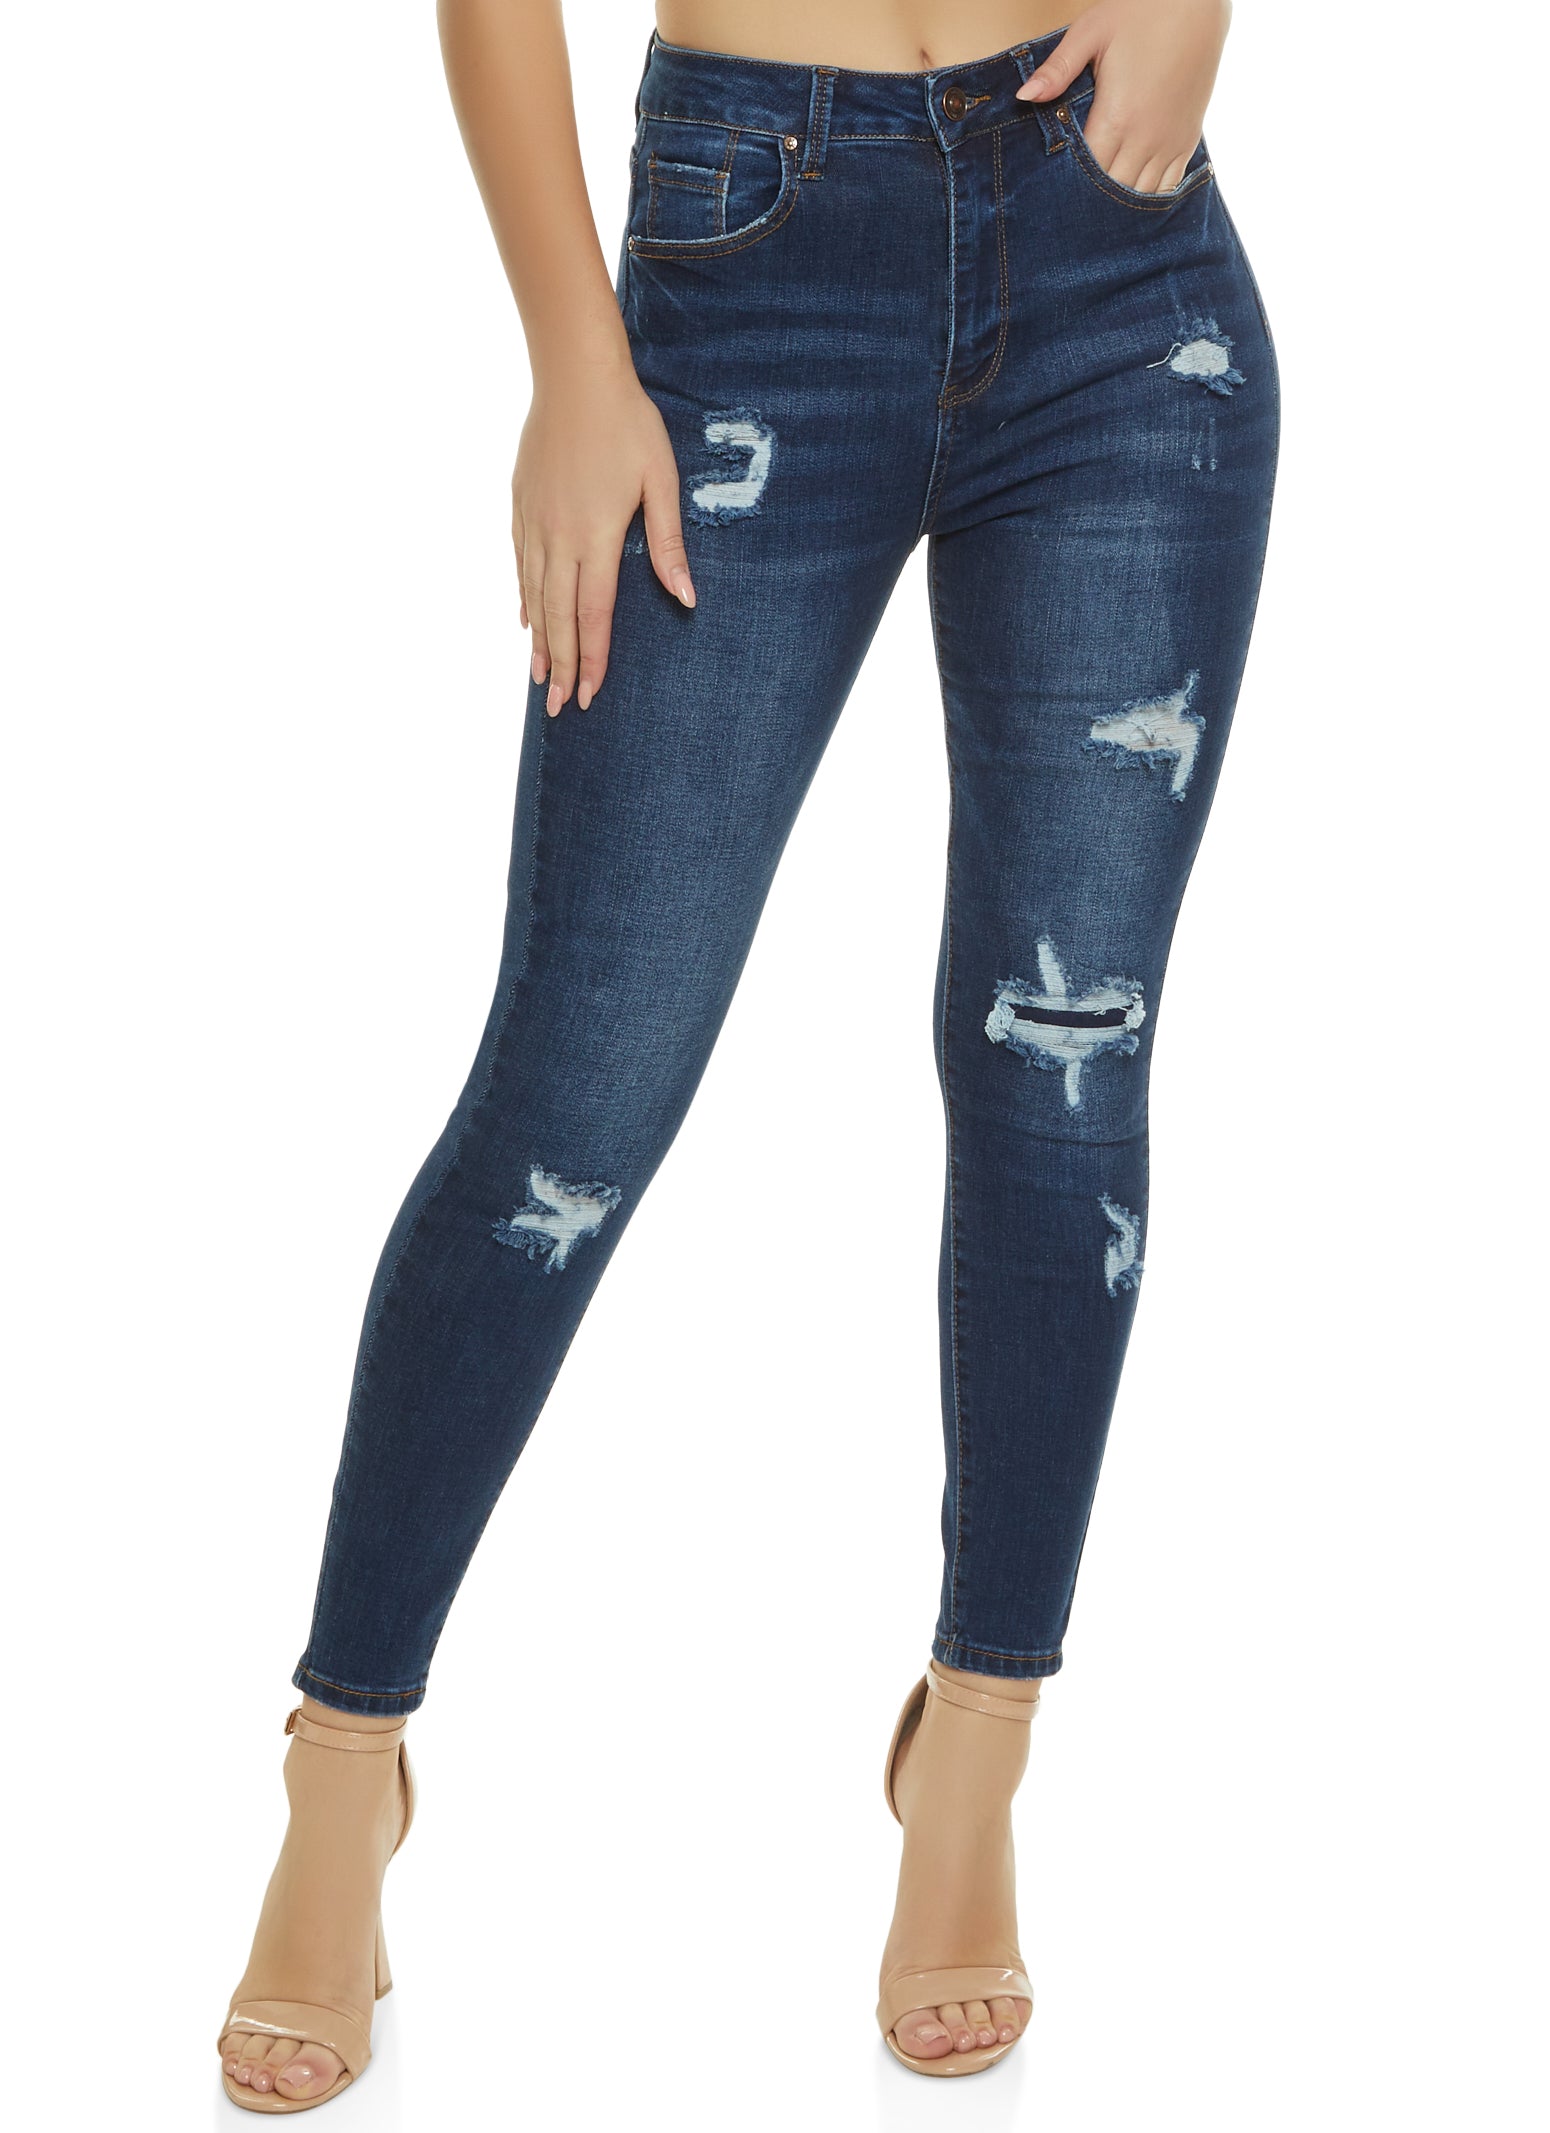 WAX Whiskered High Waist Patch and Repair Jeans